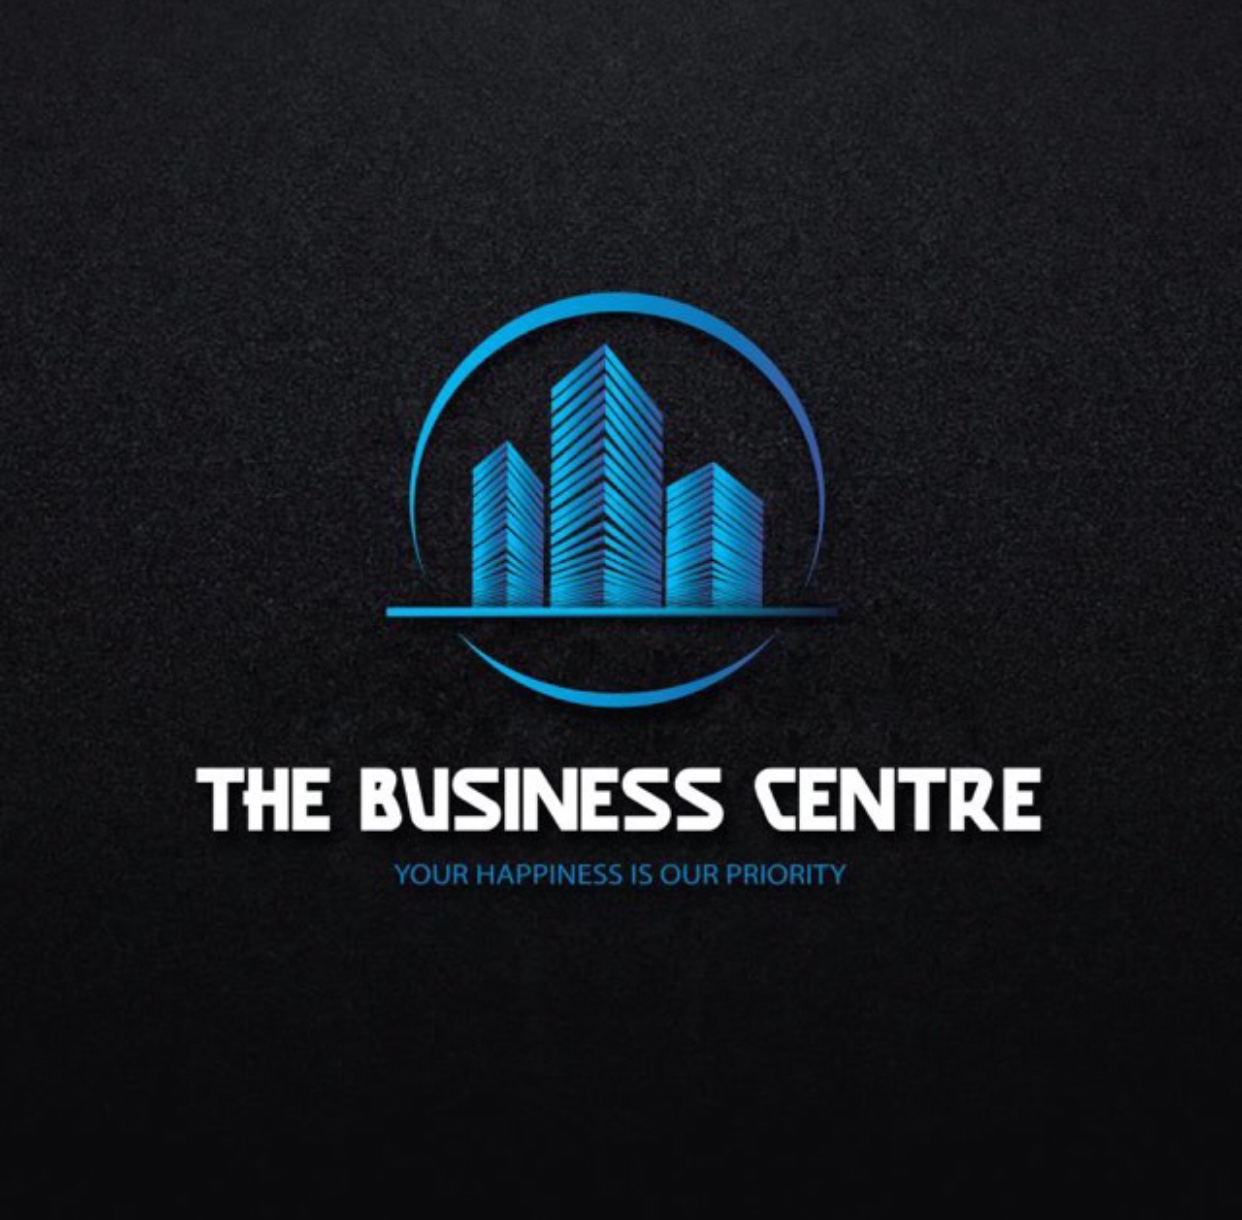 The business center